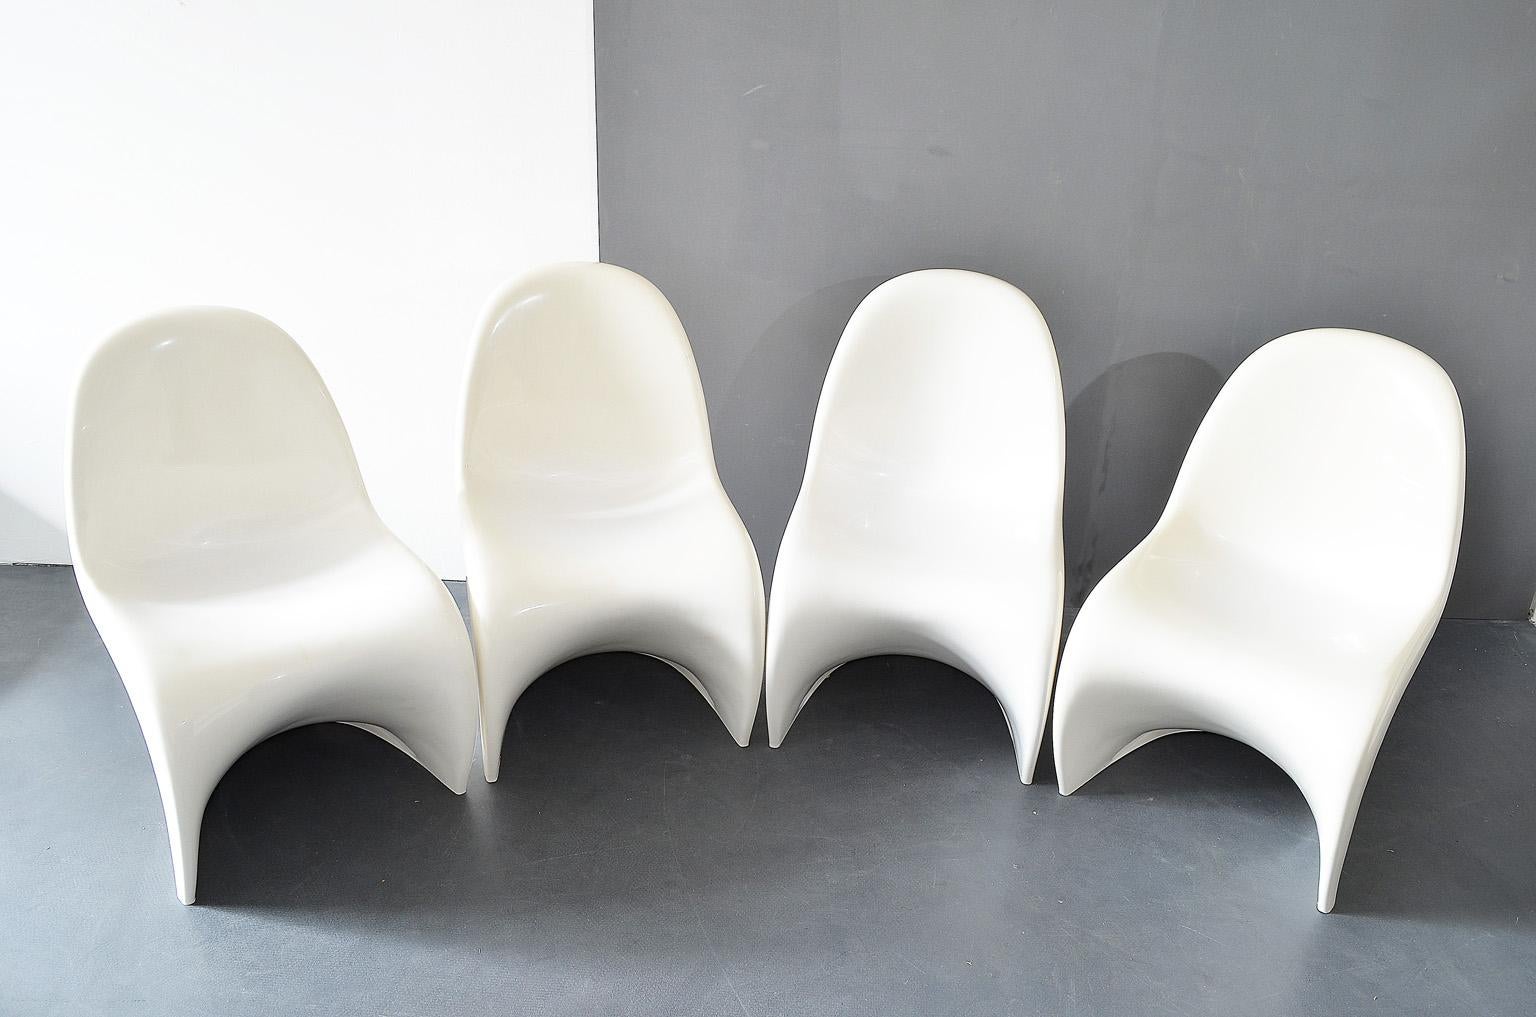 Mid-Century Modern Set of Four Panton Chairs in White by Verner Panton Fehlbaum/Hermann Miller 1974 For Sale